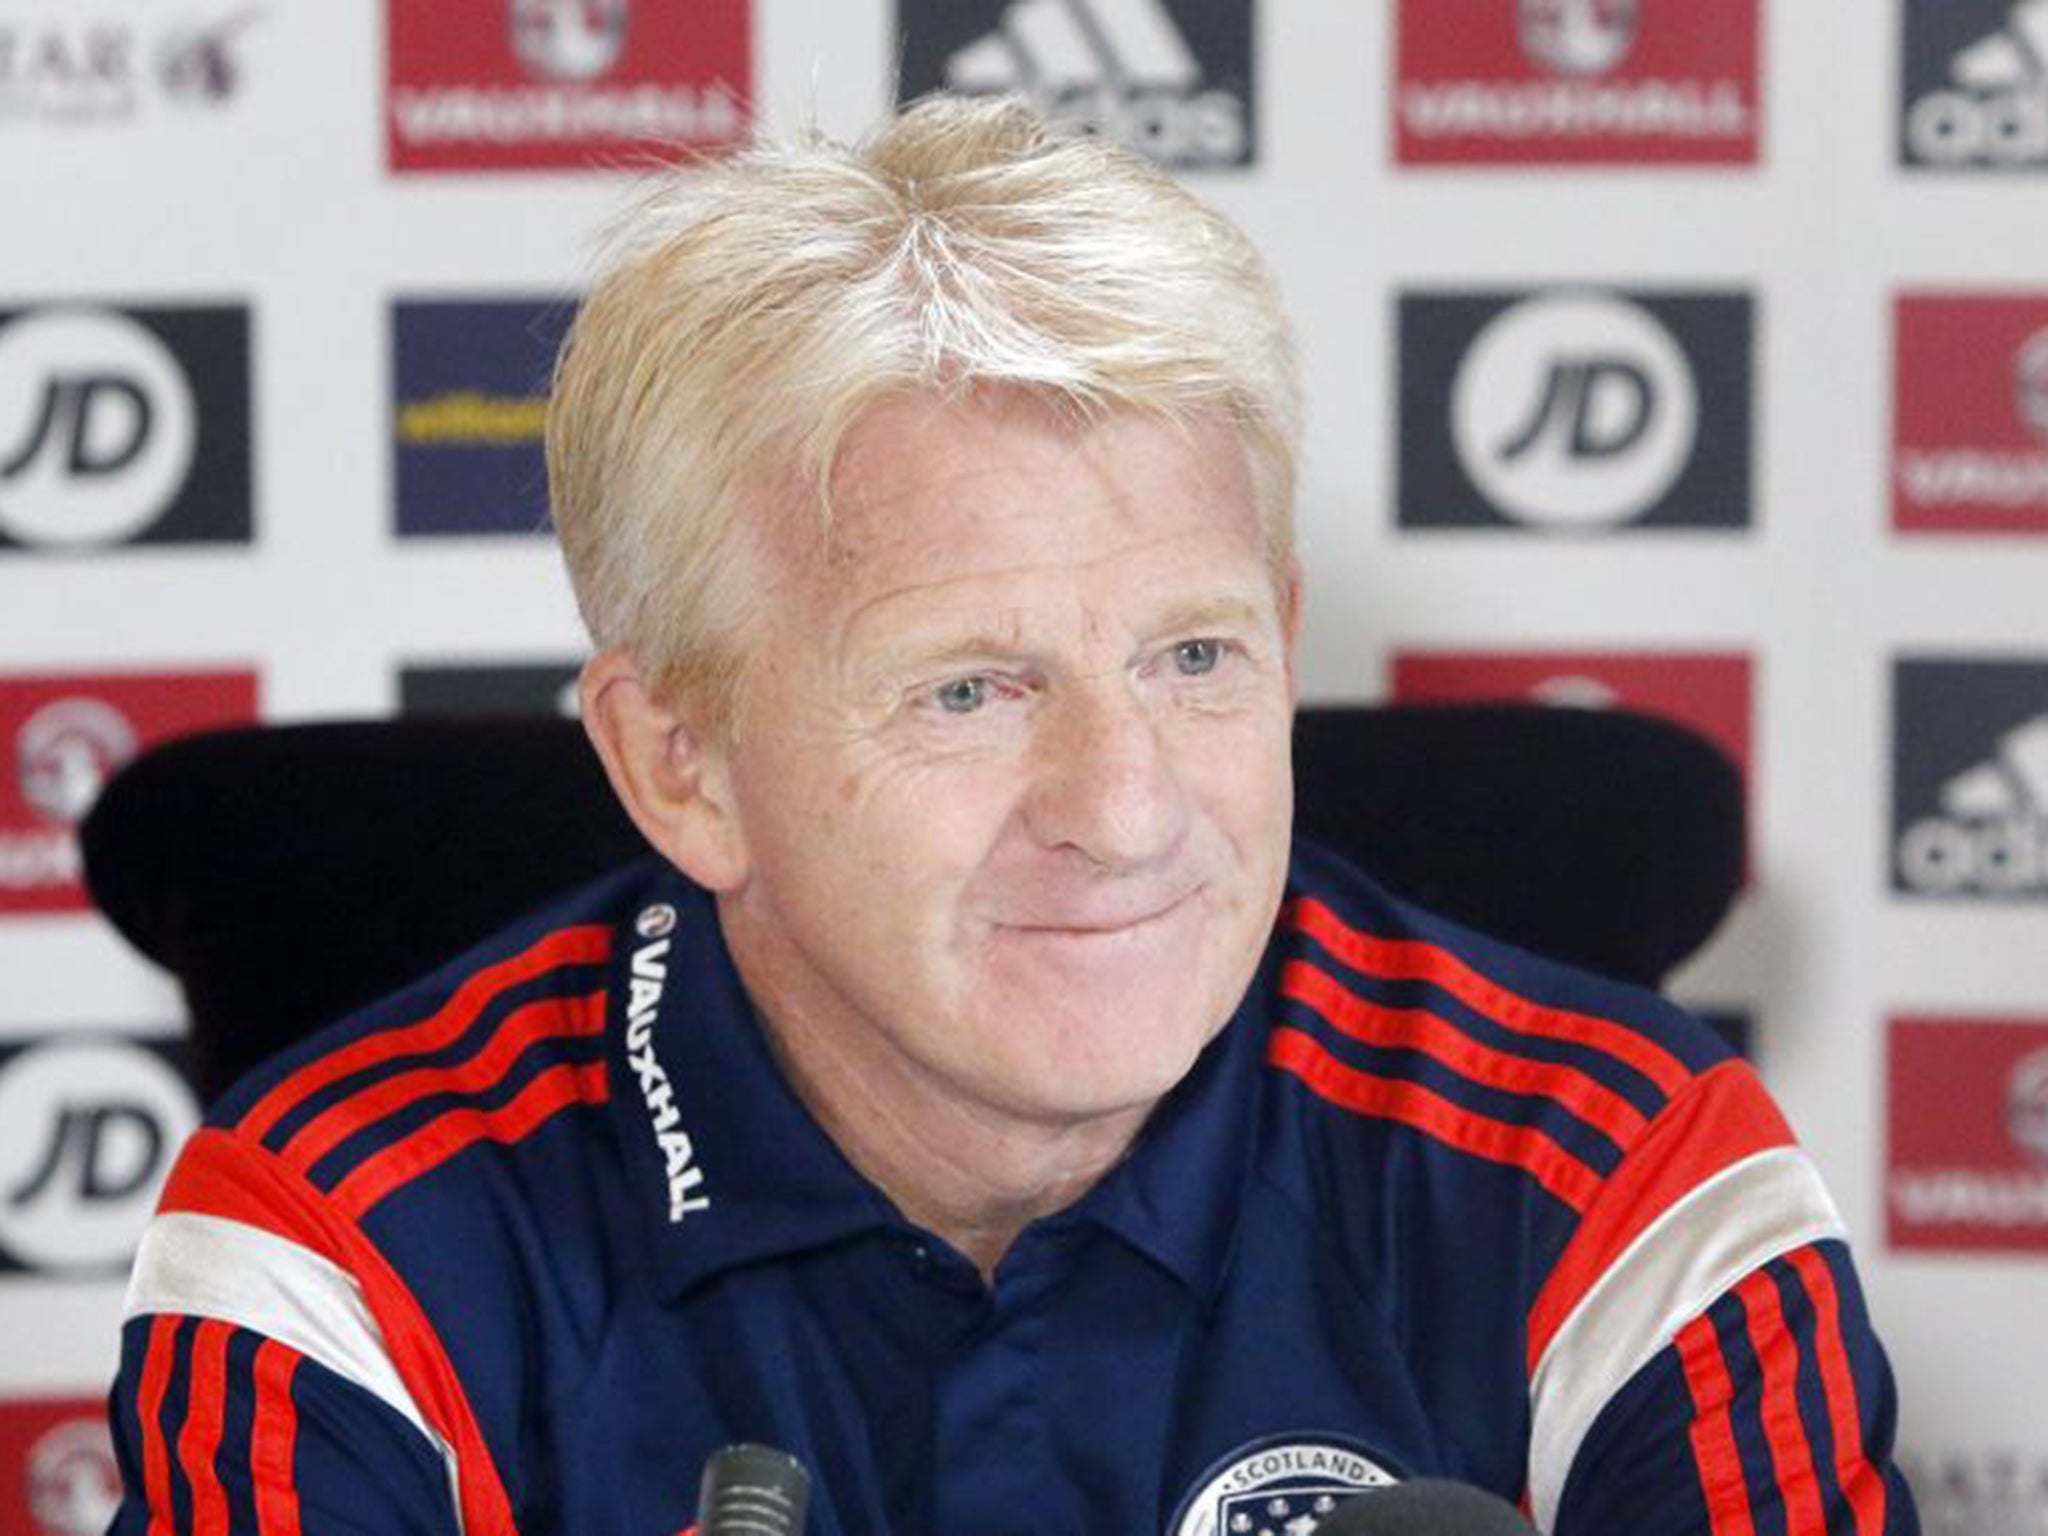 Gordon Strachan will take charge of Scotland when they play England next month